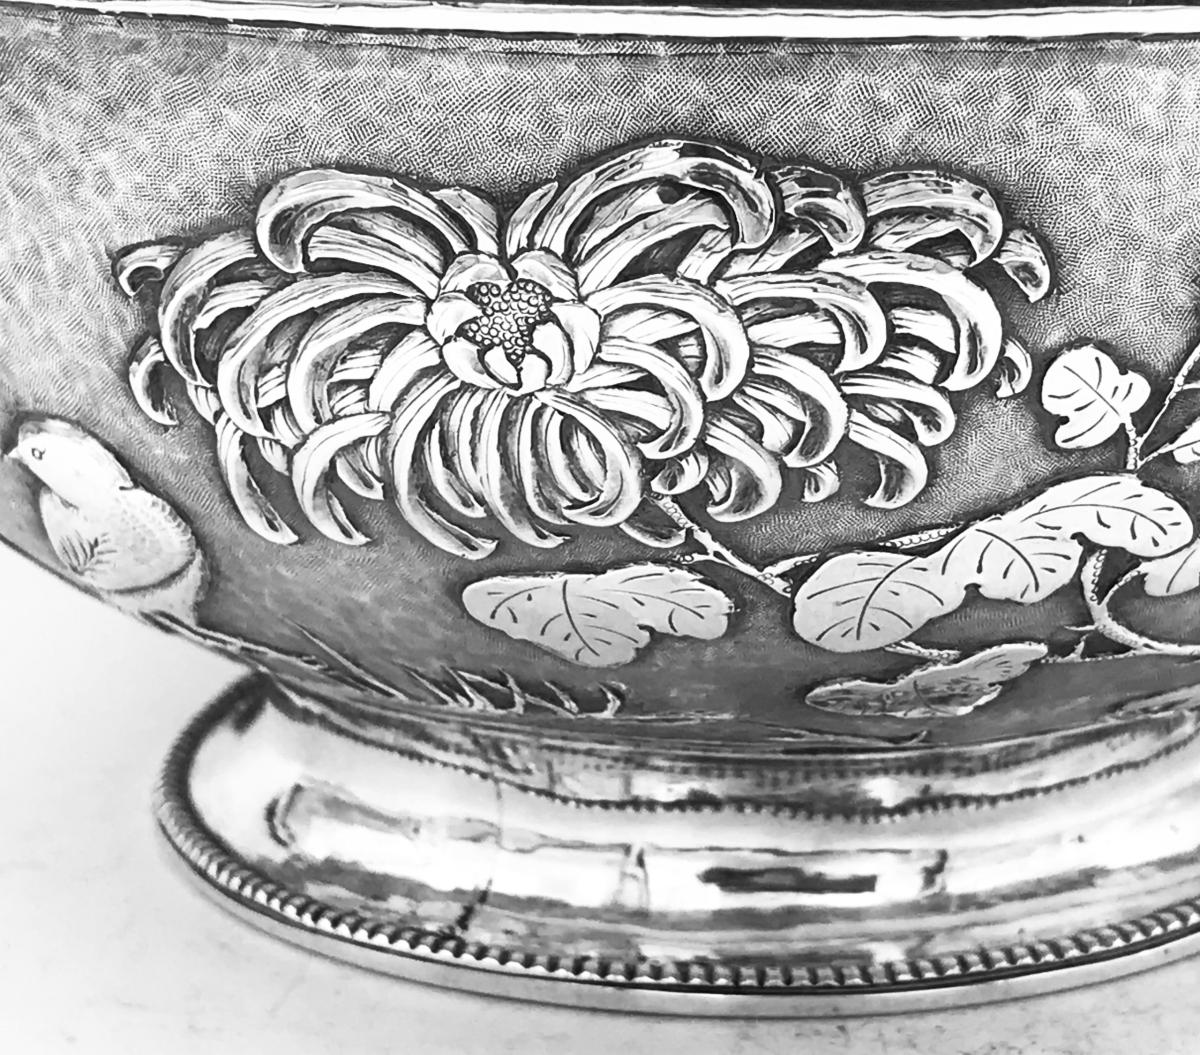 Chinese Export Silver Bowl